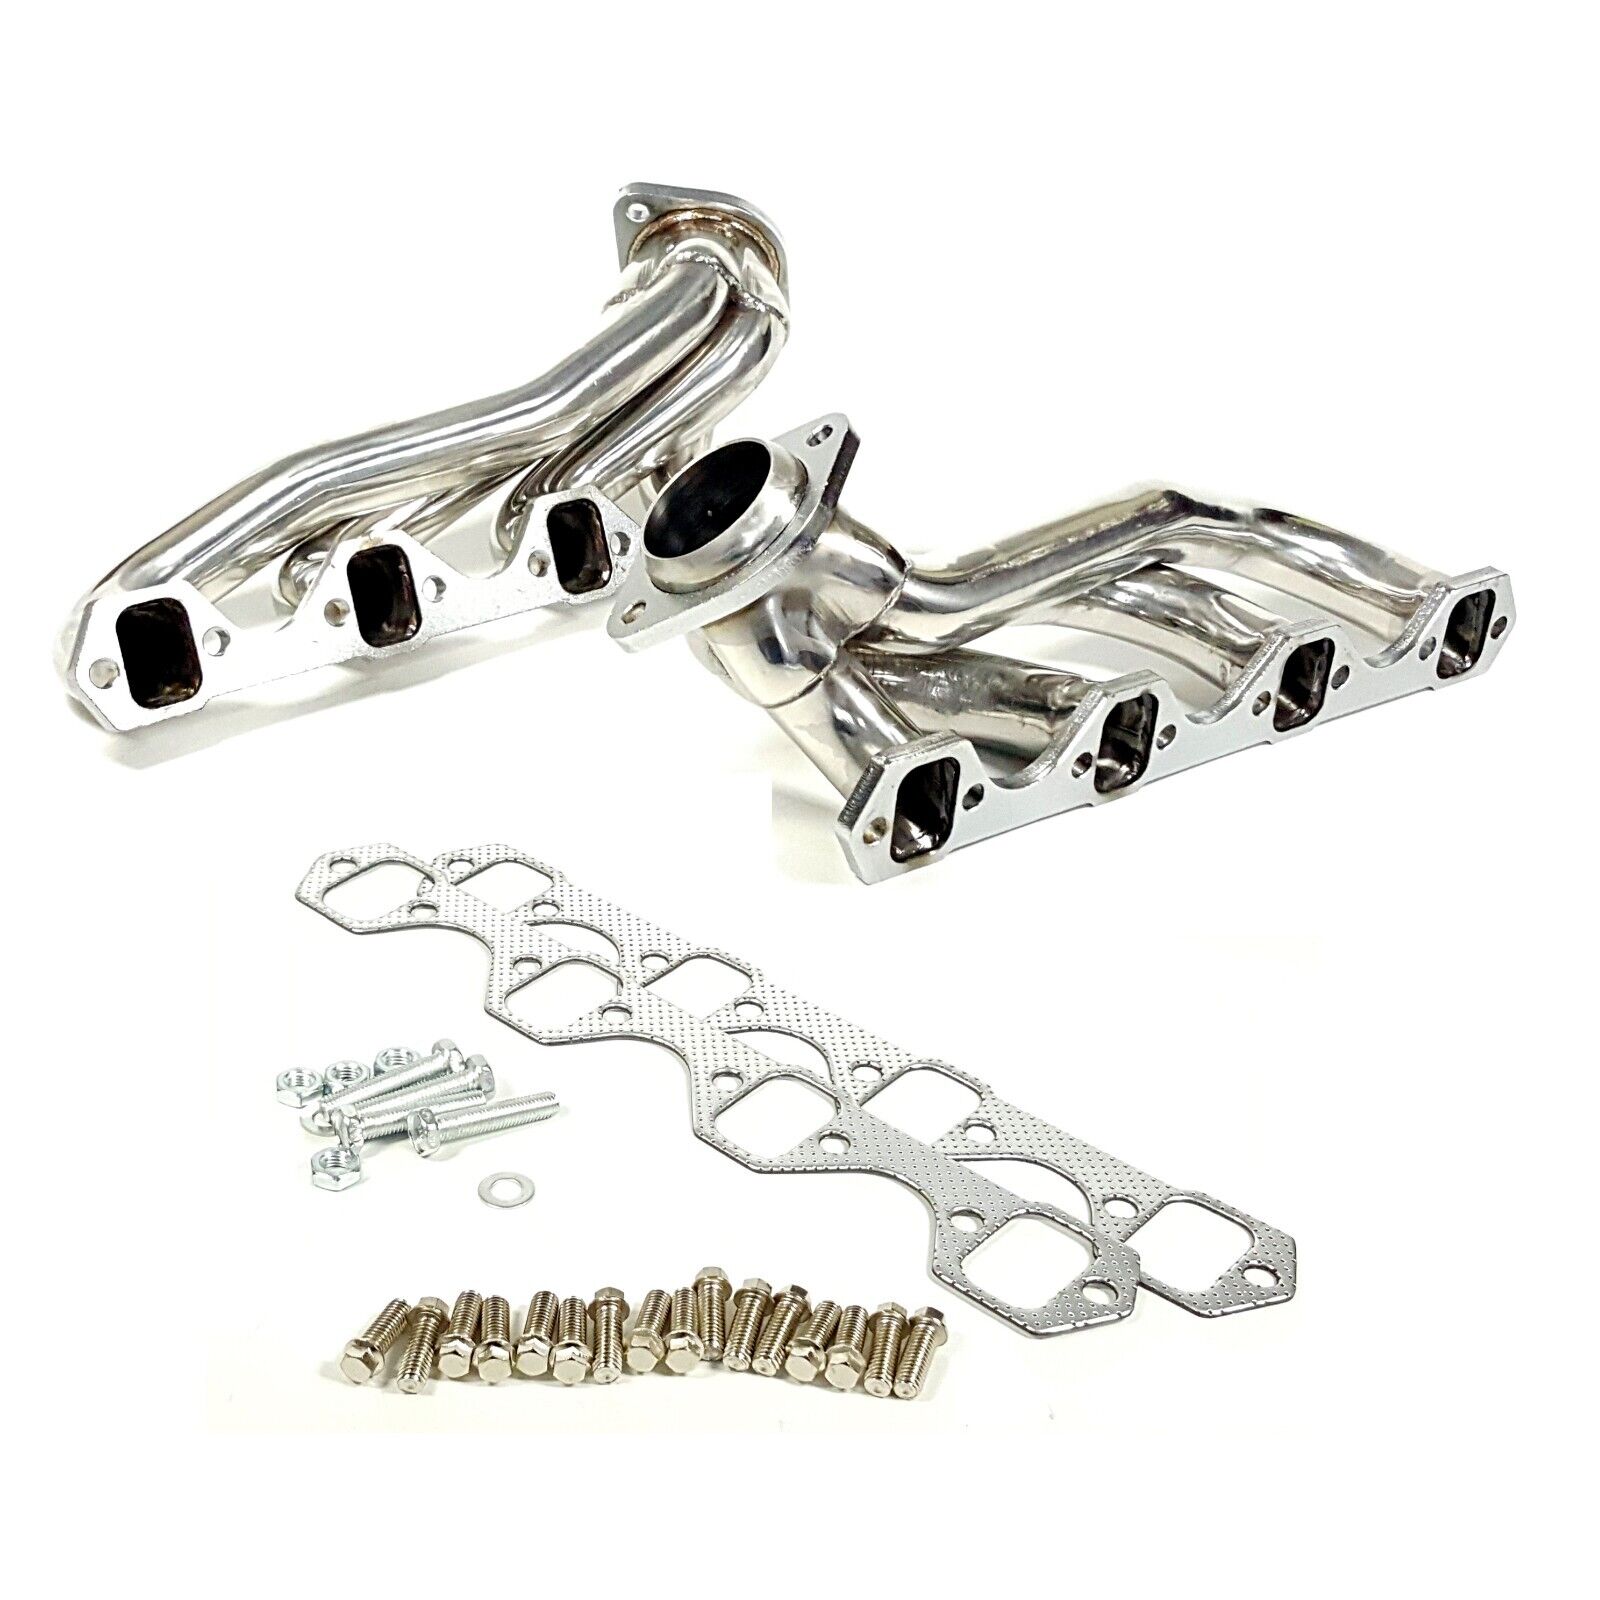 Shorty Exhaust Headers for 86-93 Ford Mustang Fox Body 5.0L GT/ LX V8 Bolt On